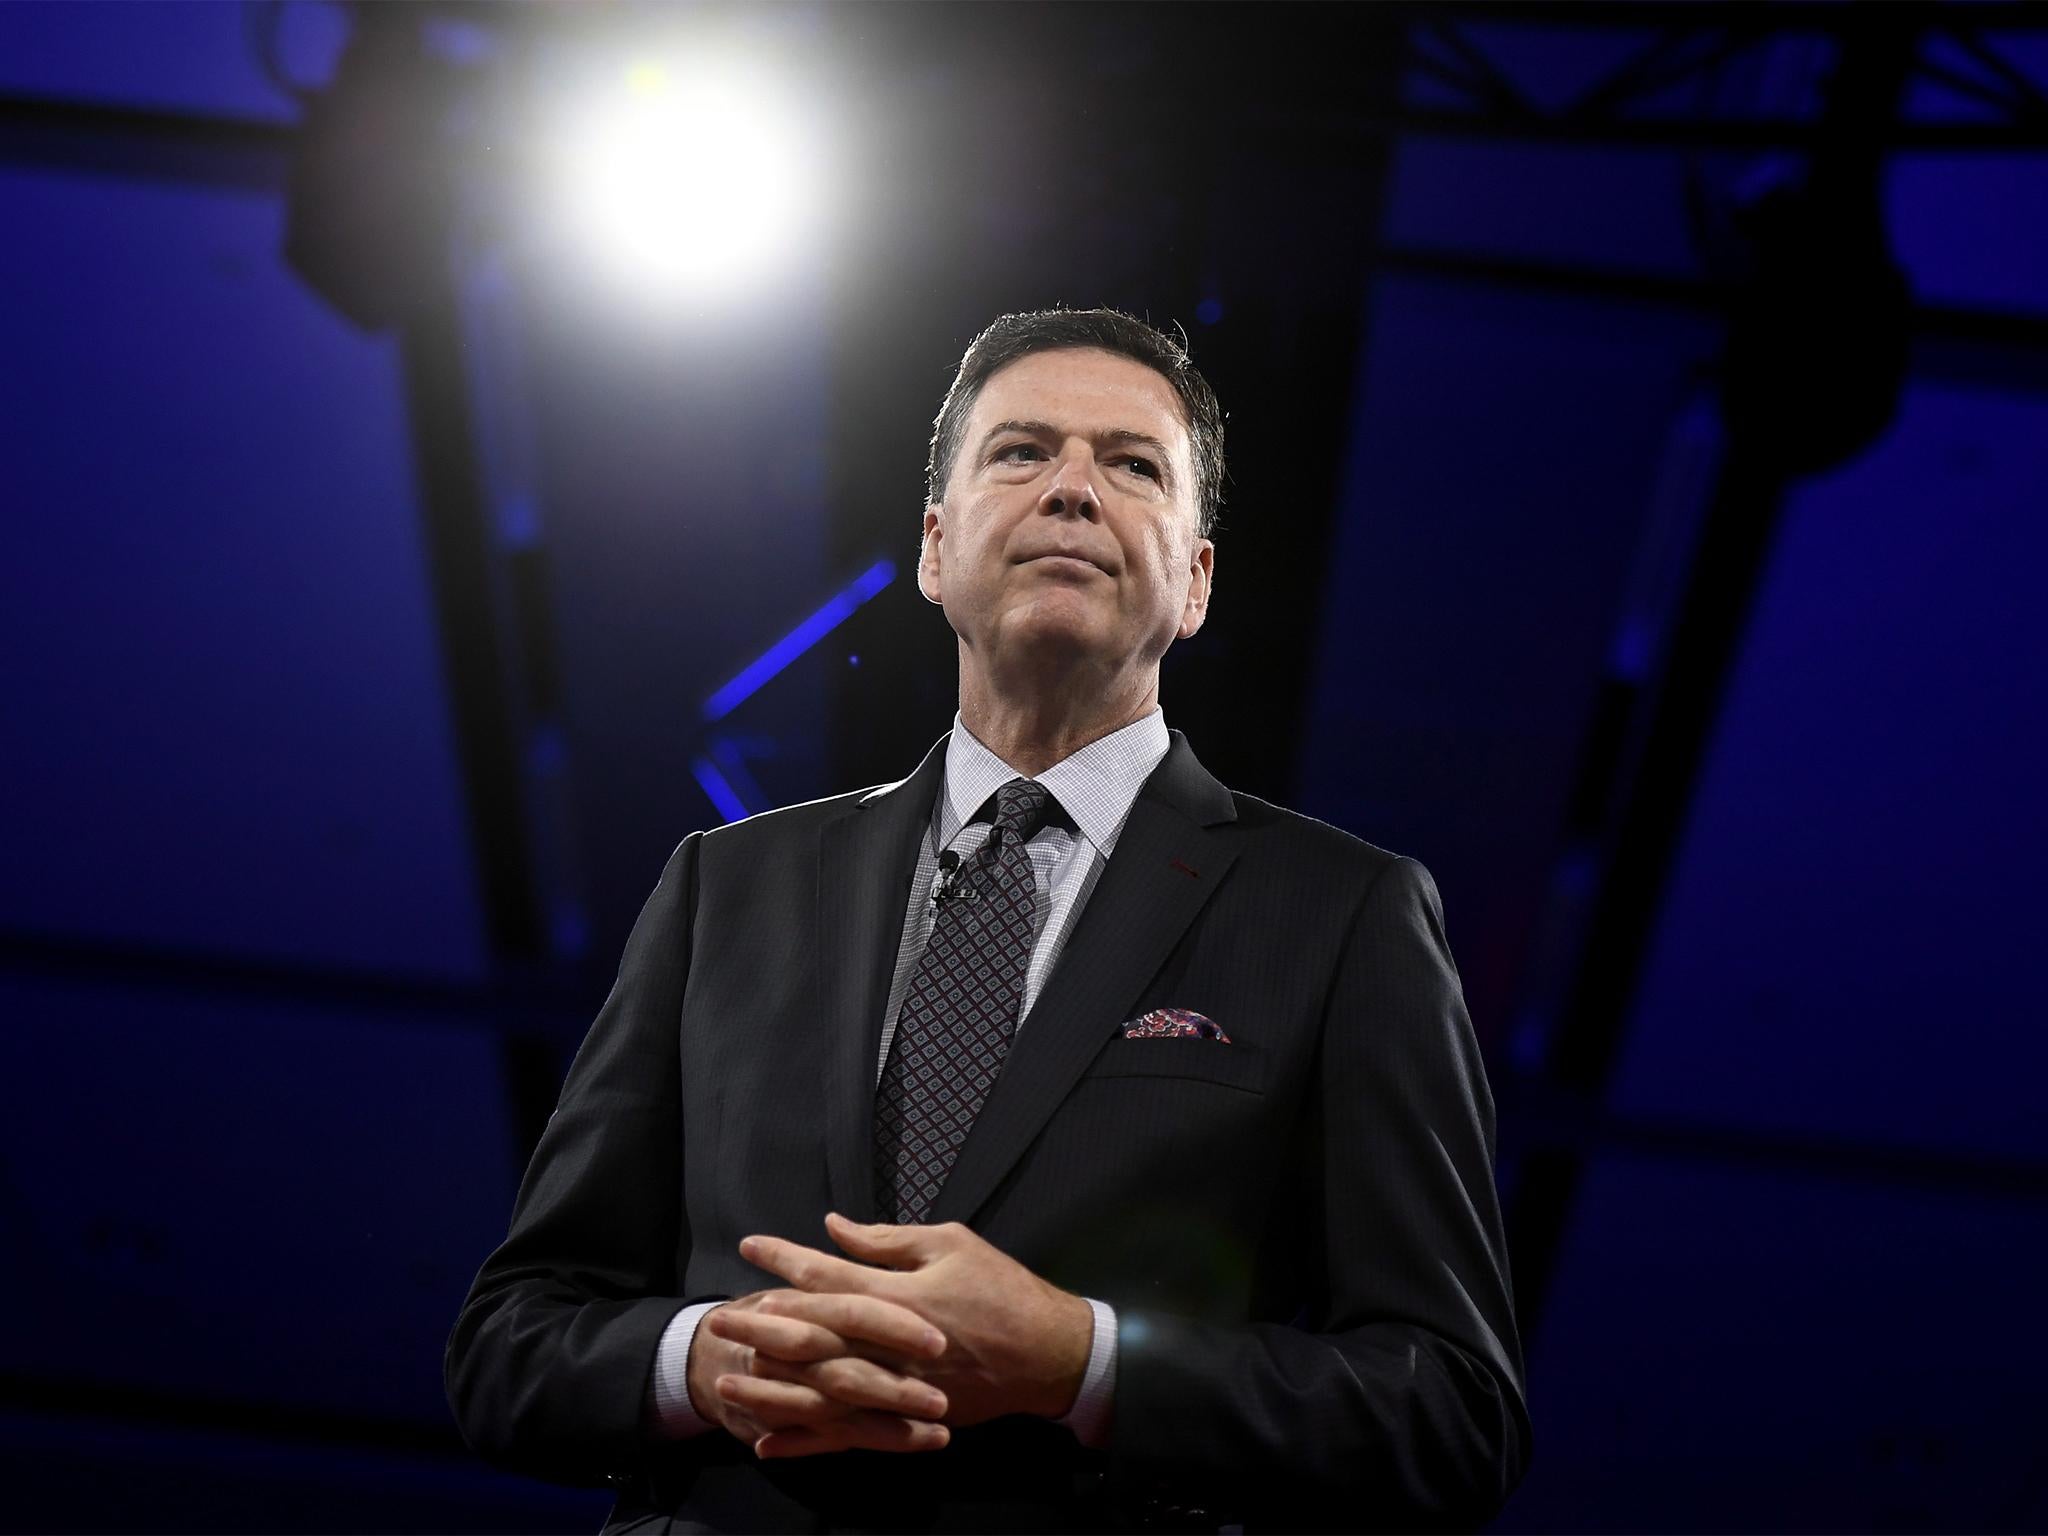 Comey had not followed regulations, according to the inspector general